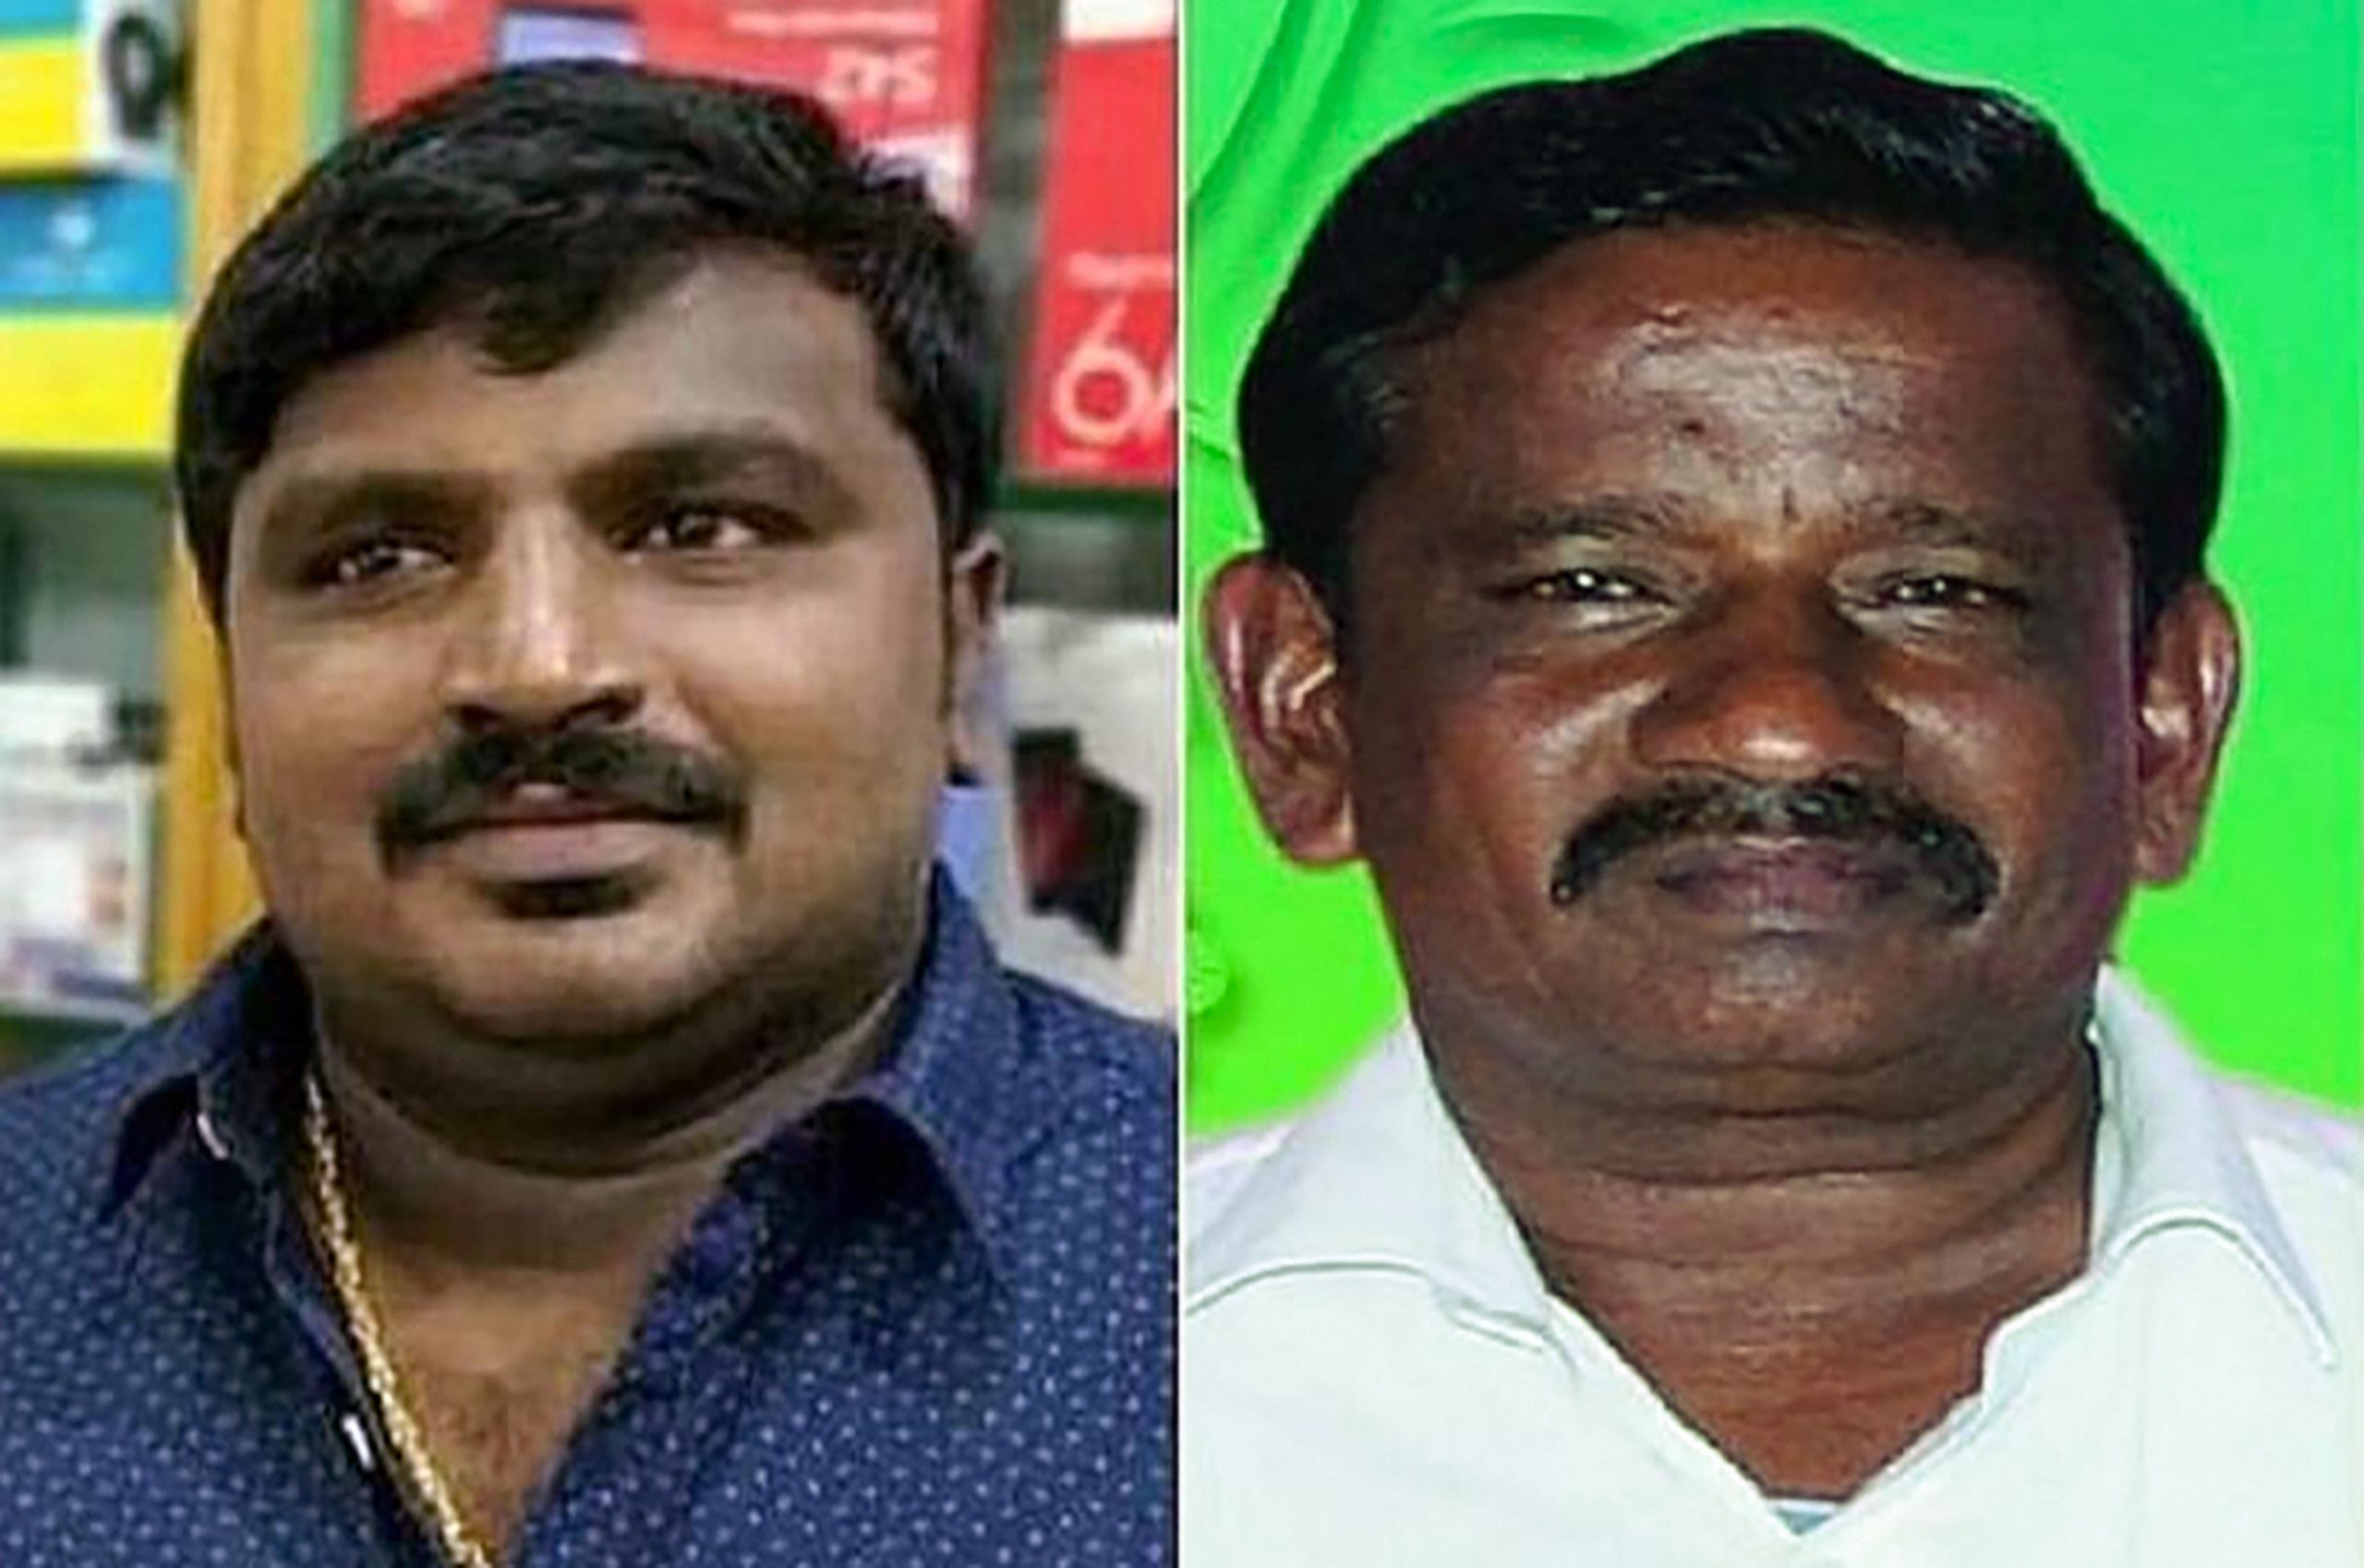 Tuticorin custodial deaths: ‘There were blood stains on canes, table’, cop tells court